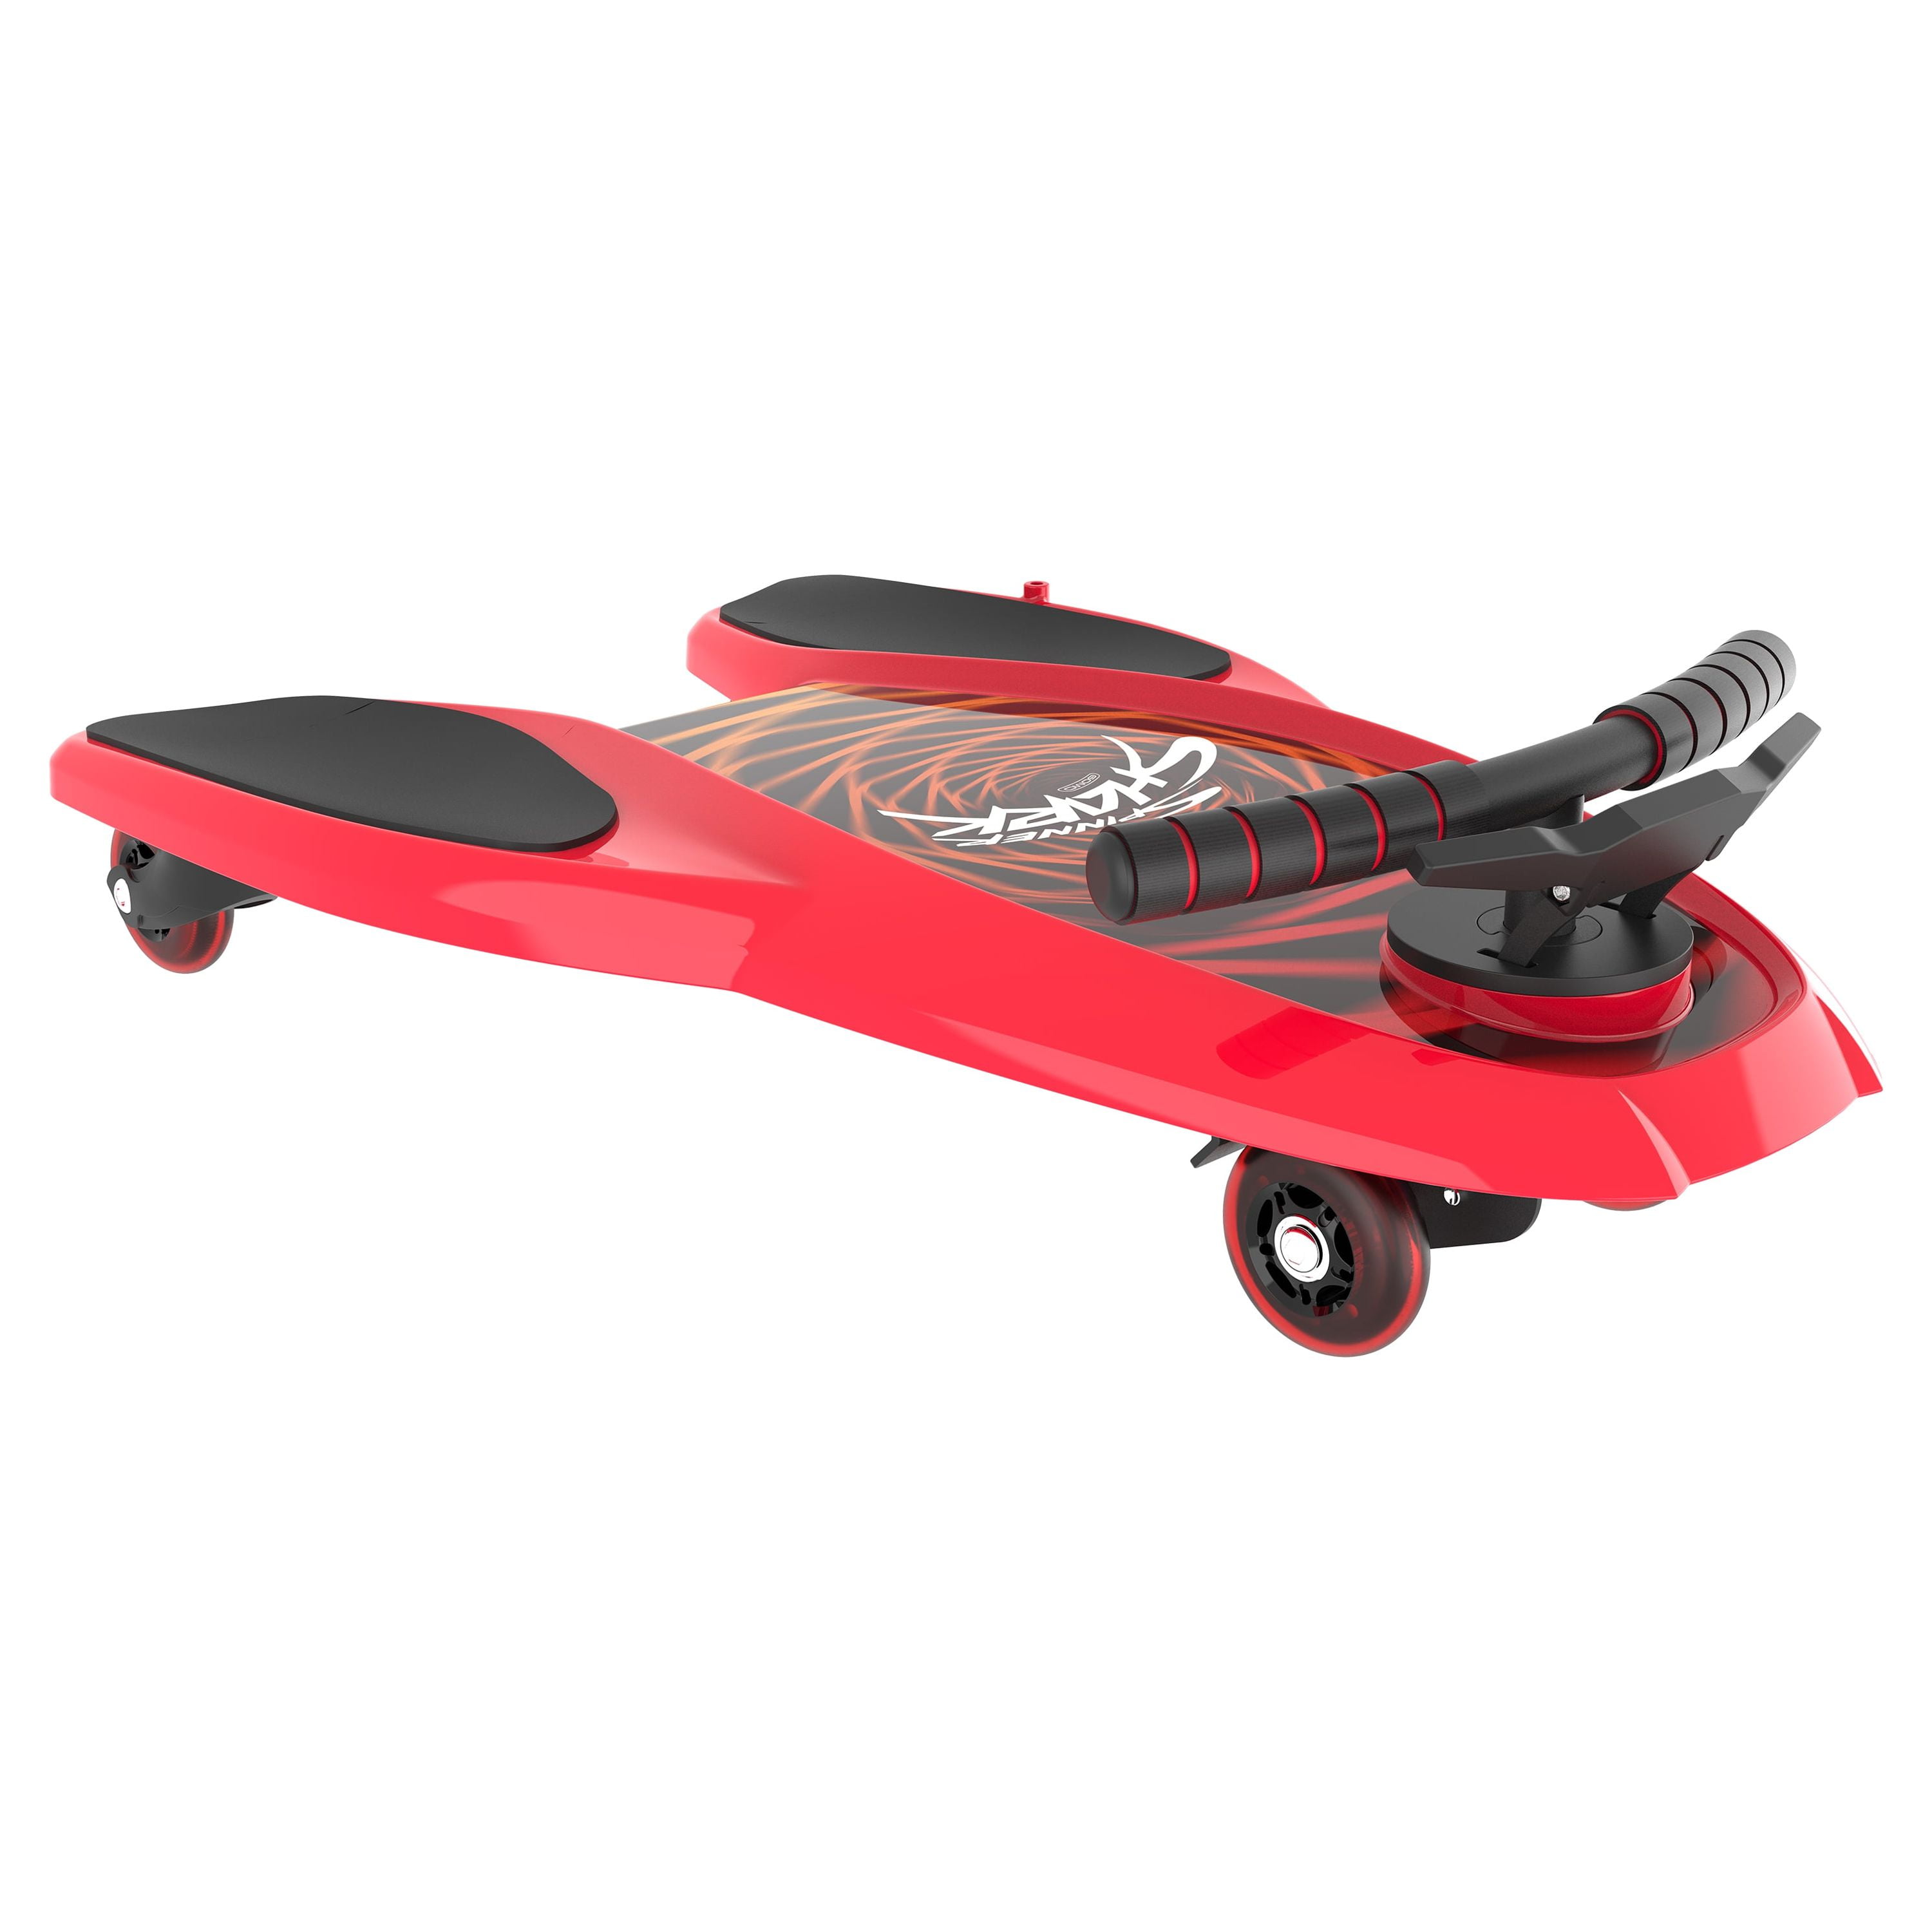 GOMO Red Spinner Shark Kneeboard Toy for Kids 6 Years and up, 74 mm wheels  